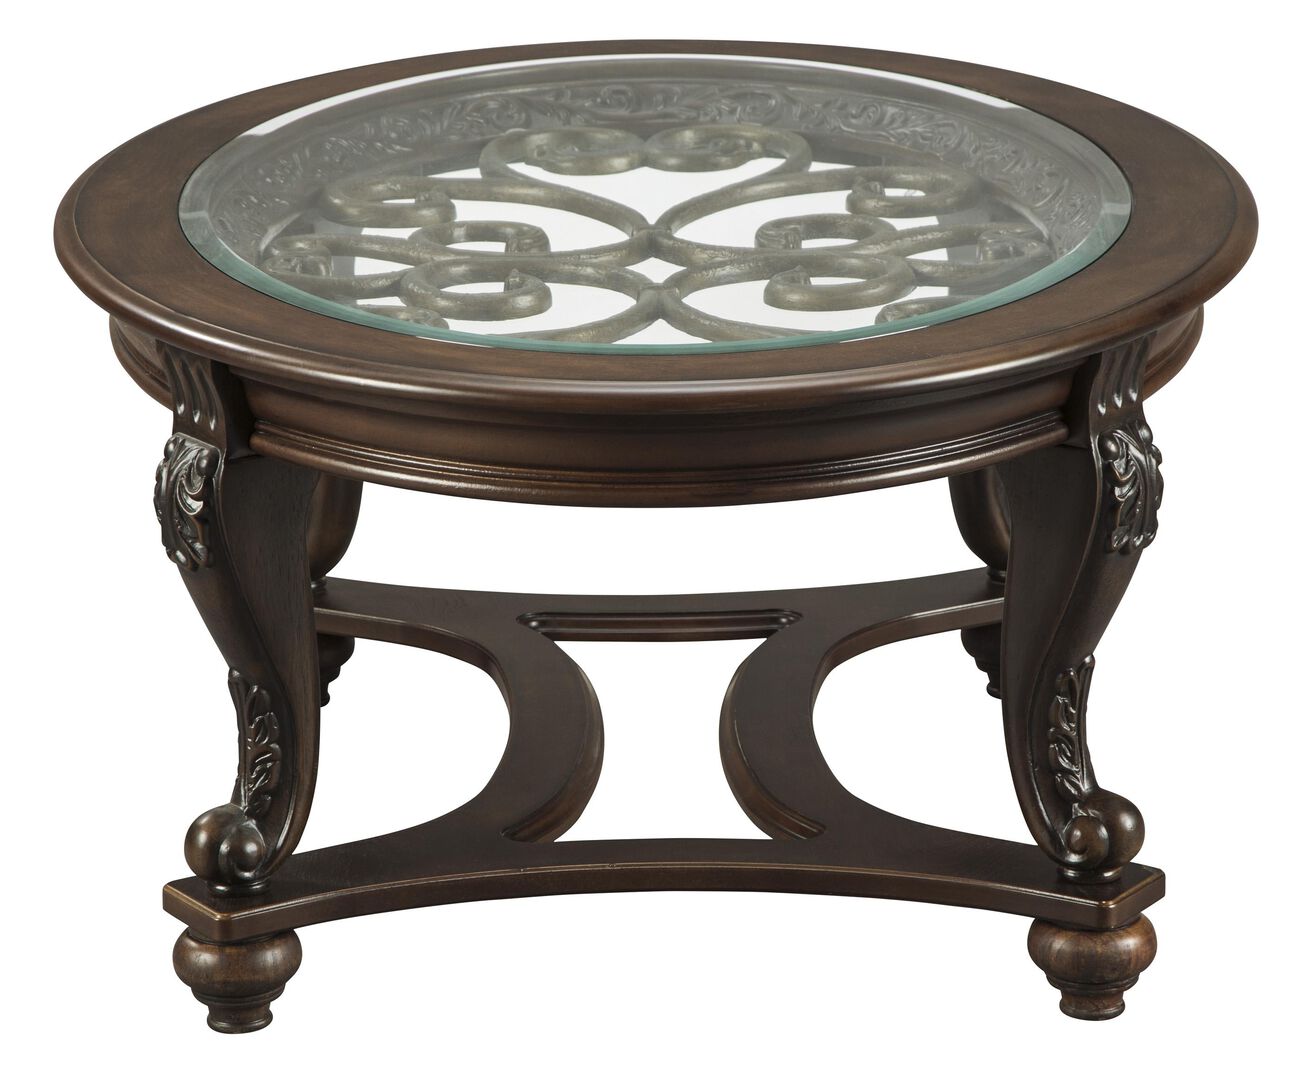 Traditional Wooden Oval Cocktail Table with Glass Top and Bun Feet, Brown